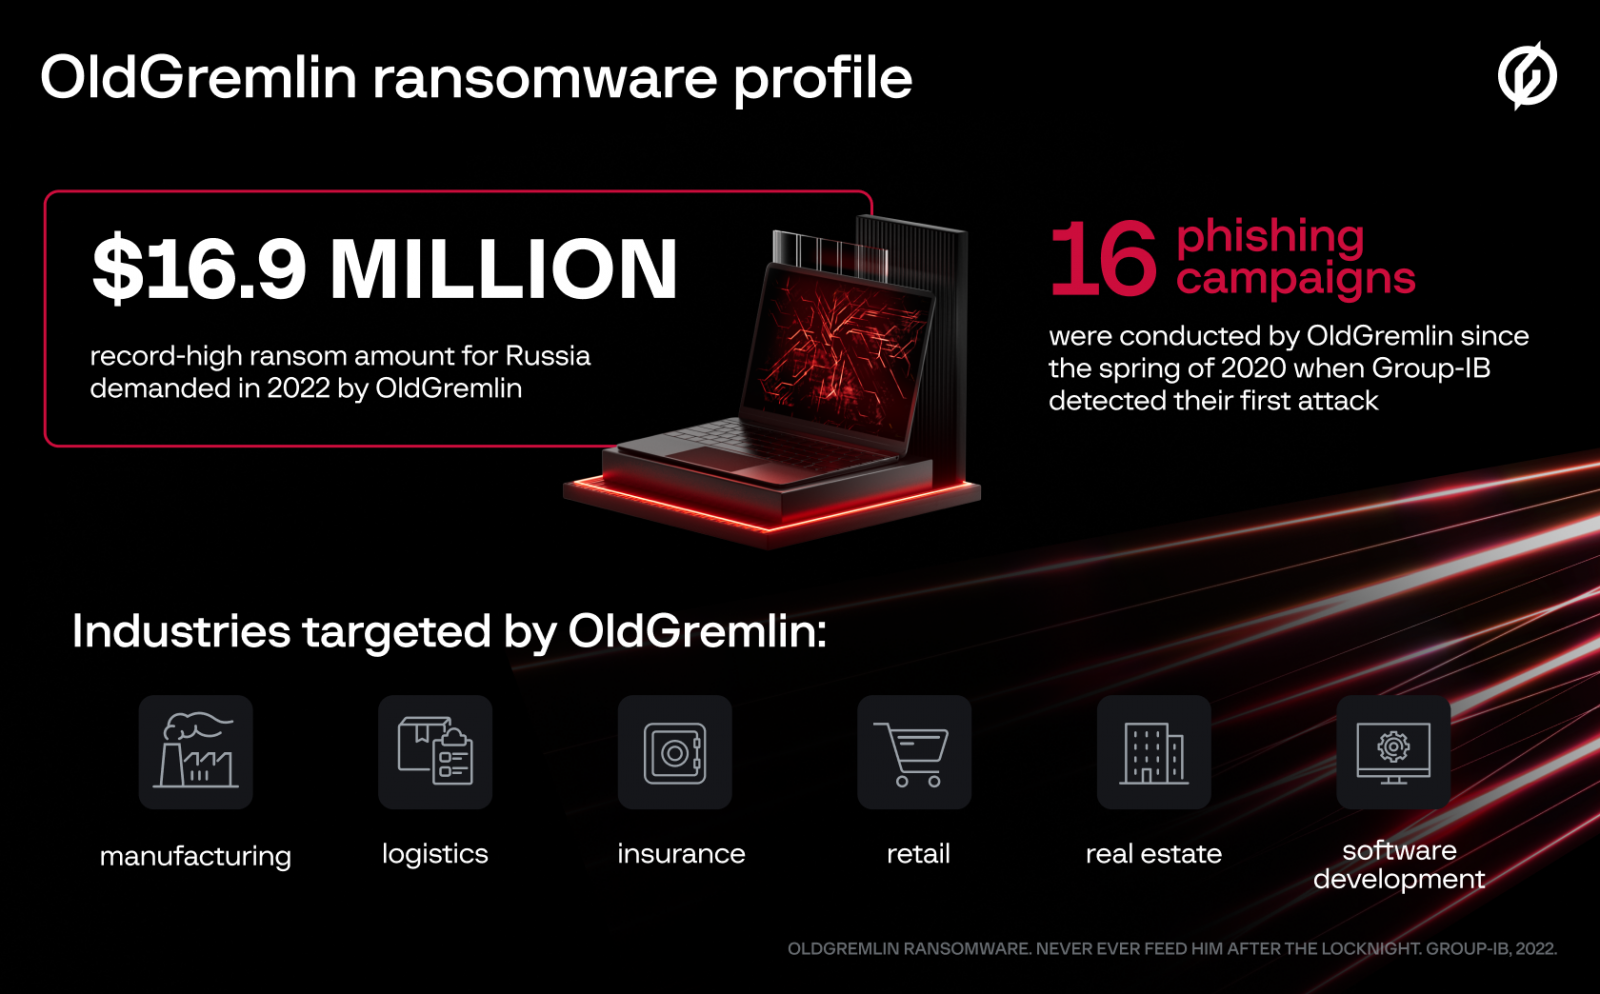 OldGremlin ransomware group highest ransomware demand in 2022